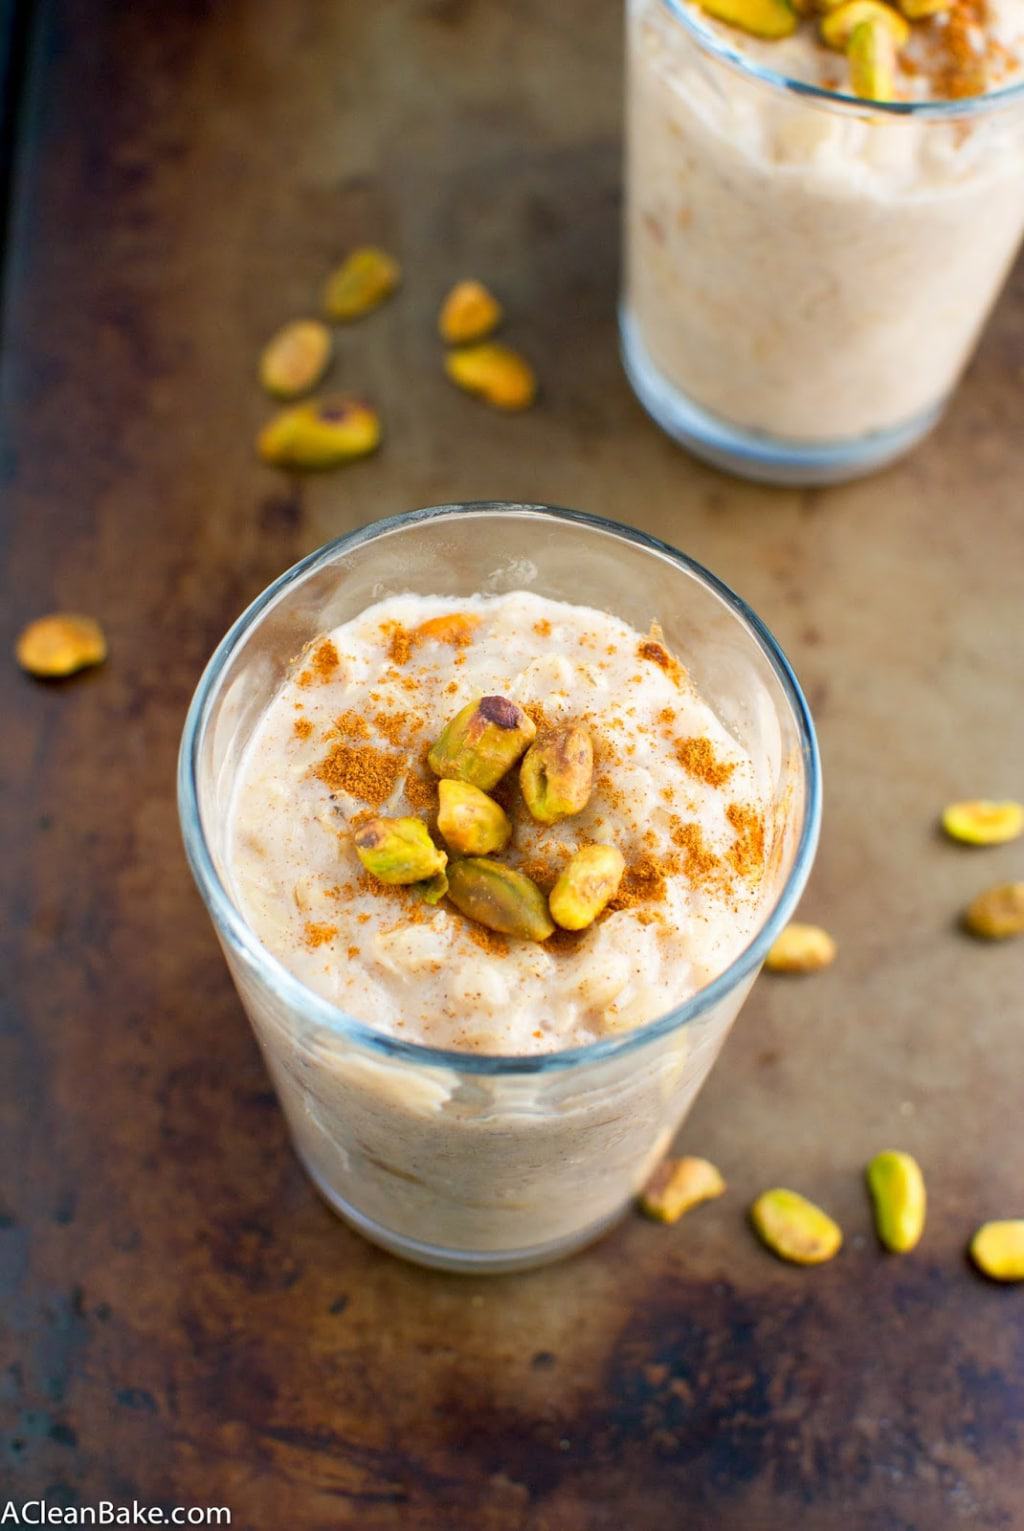 Pistachio Orange Rice Pudding (with Brown Rice) A Clean Bake